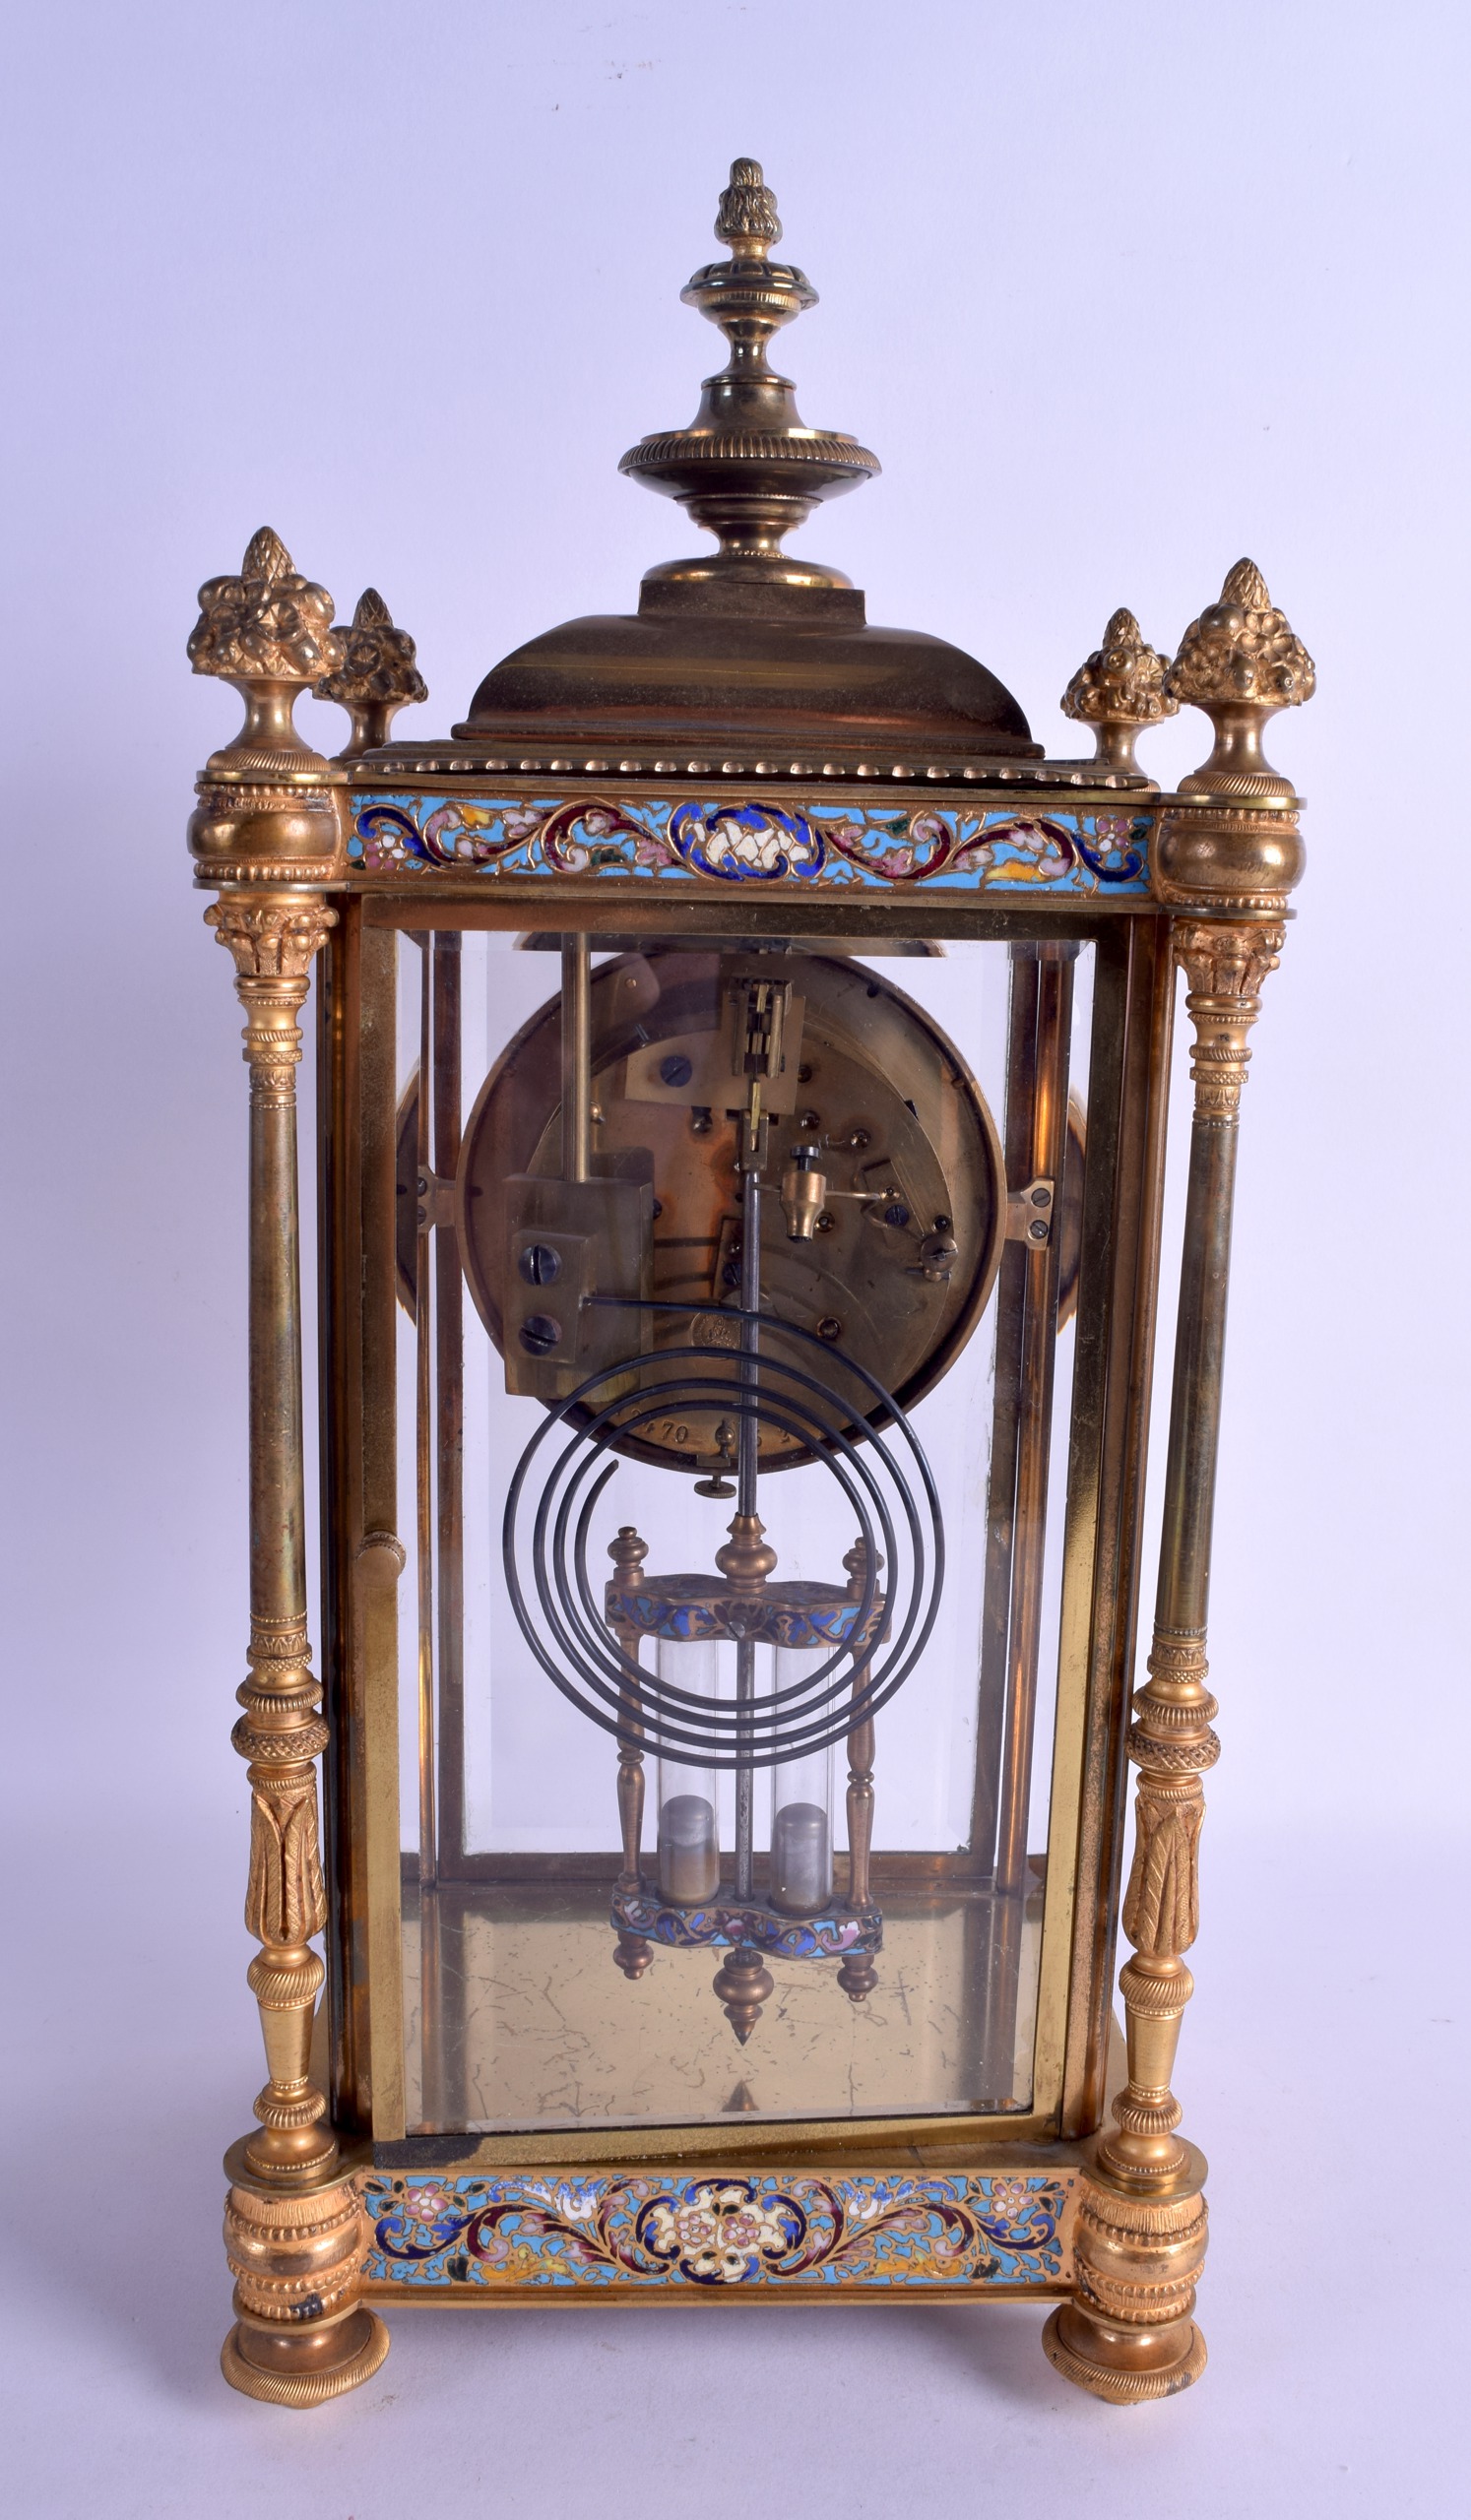 A LATE 19TH CENTURY FRENCH ORMOLU AND CHAMPLEVE ENAMEL MANTEL CLOCK signed A Gautier, decorated with - Image 2 of 2